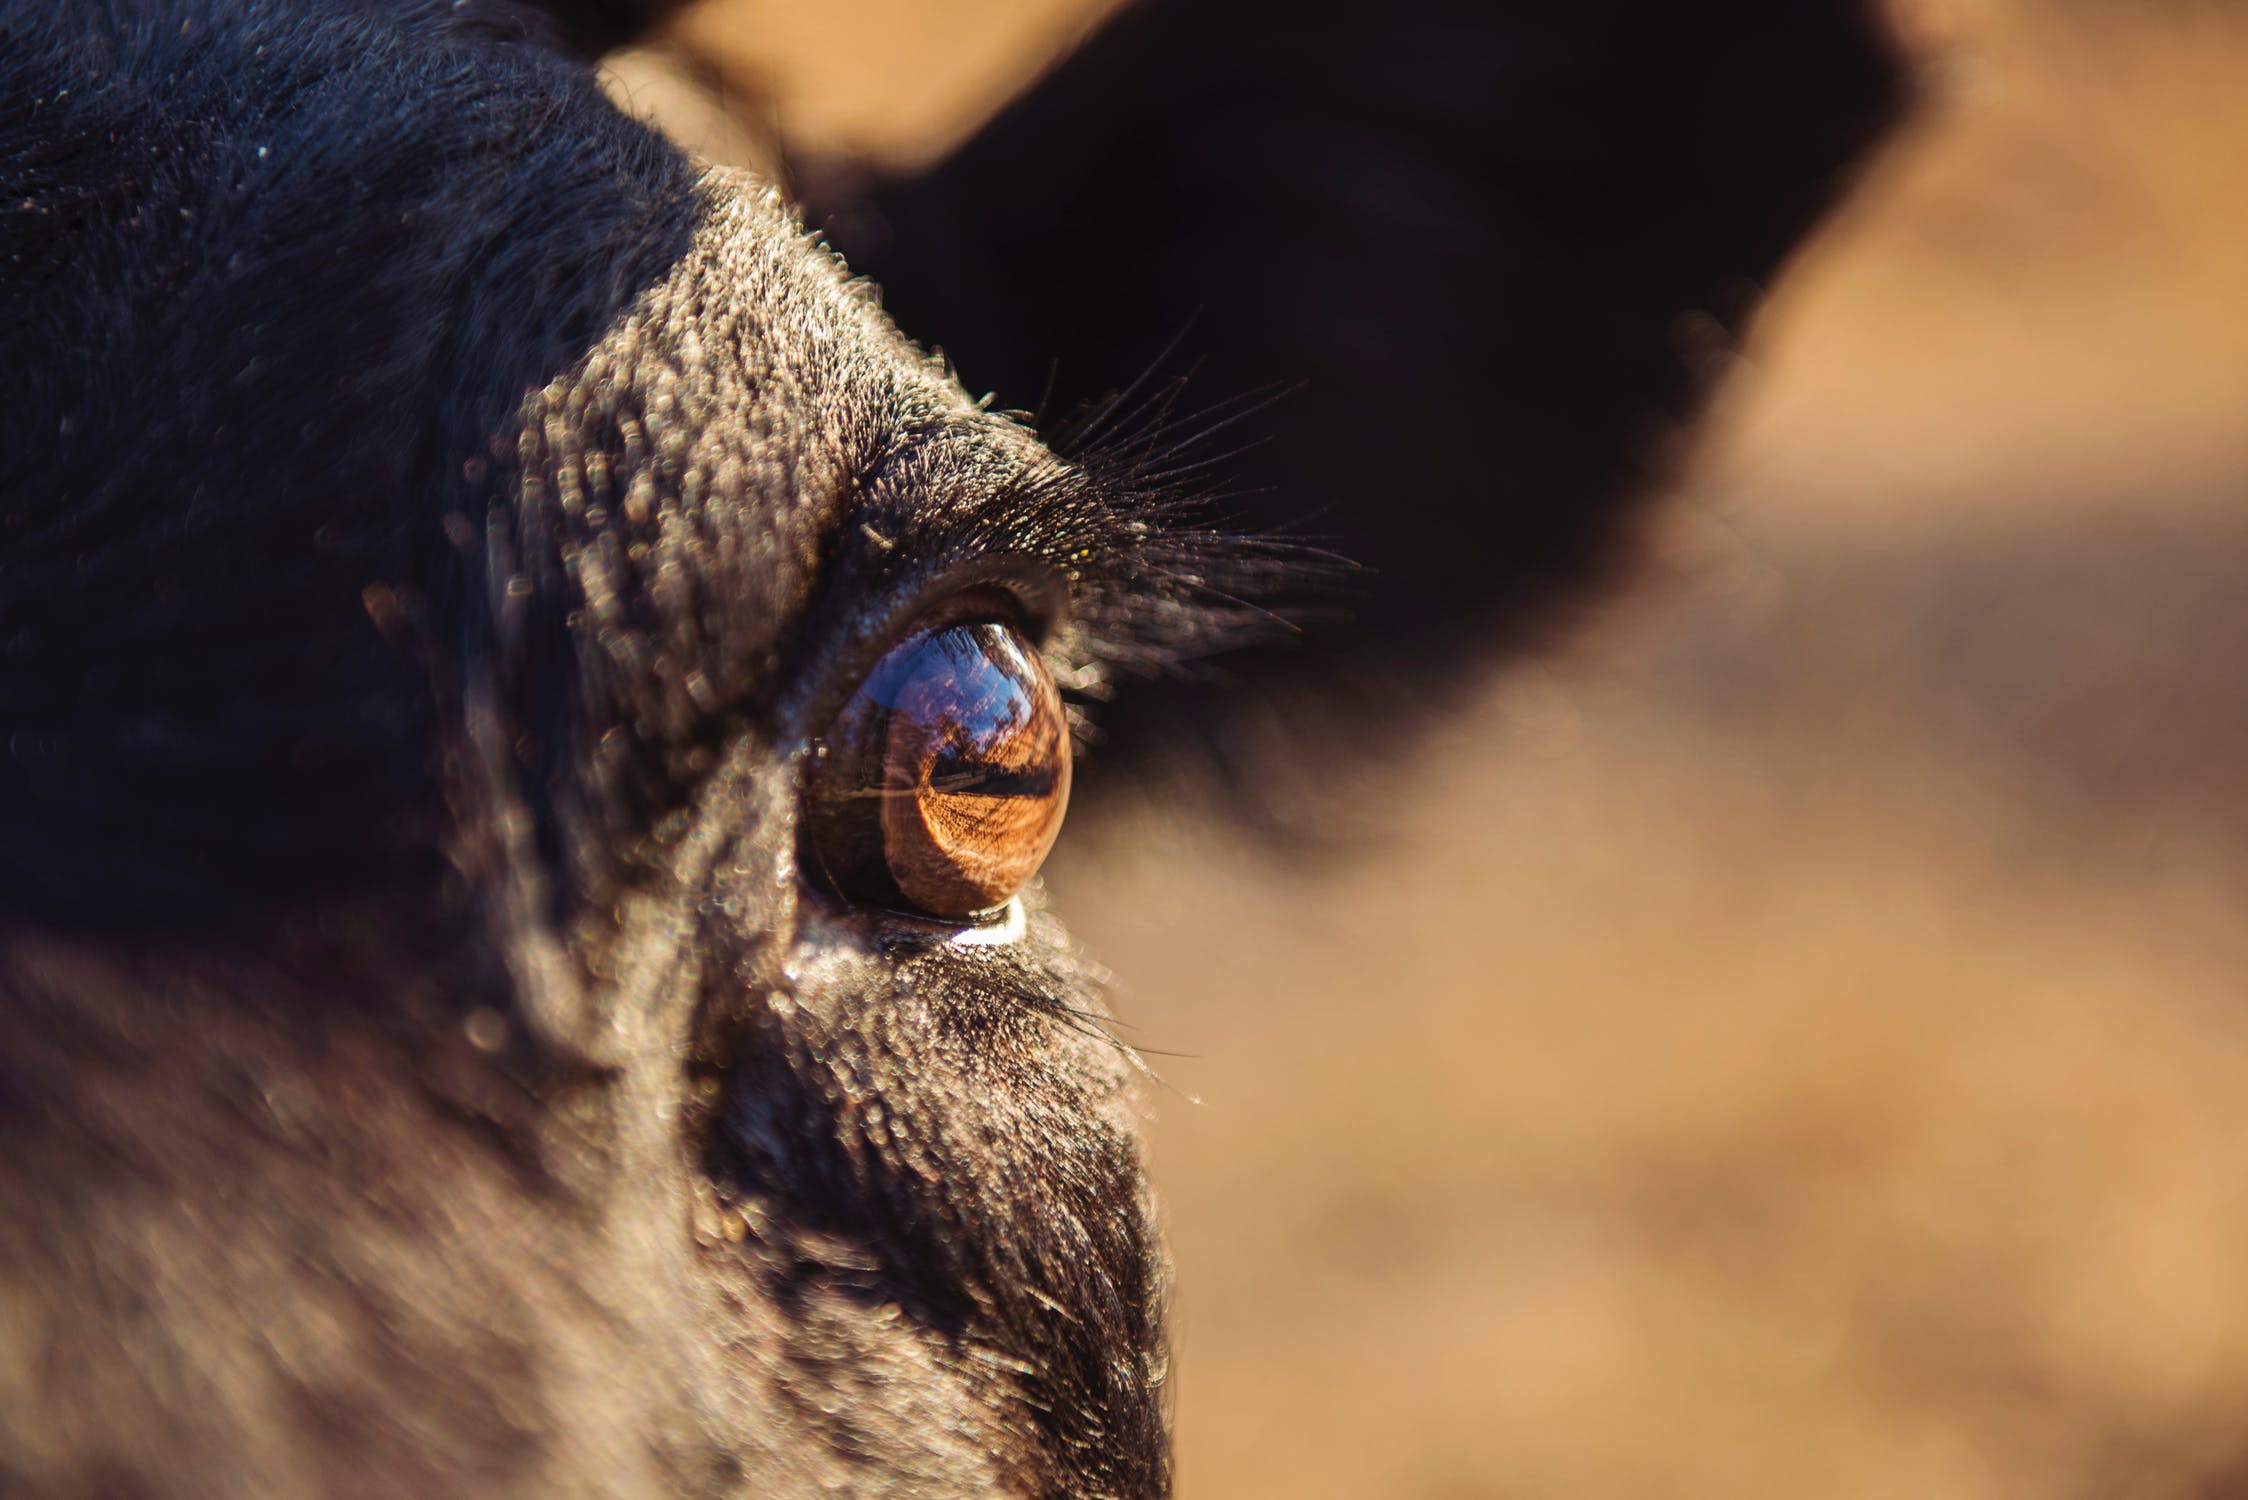 A close shot of a cow's eye. The cow seems to be in pain.